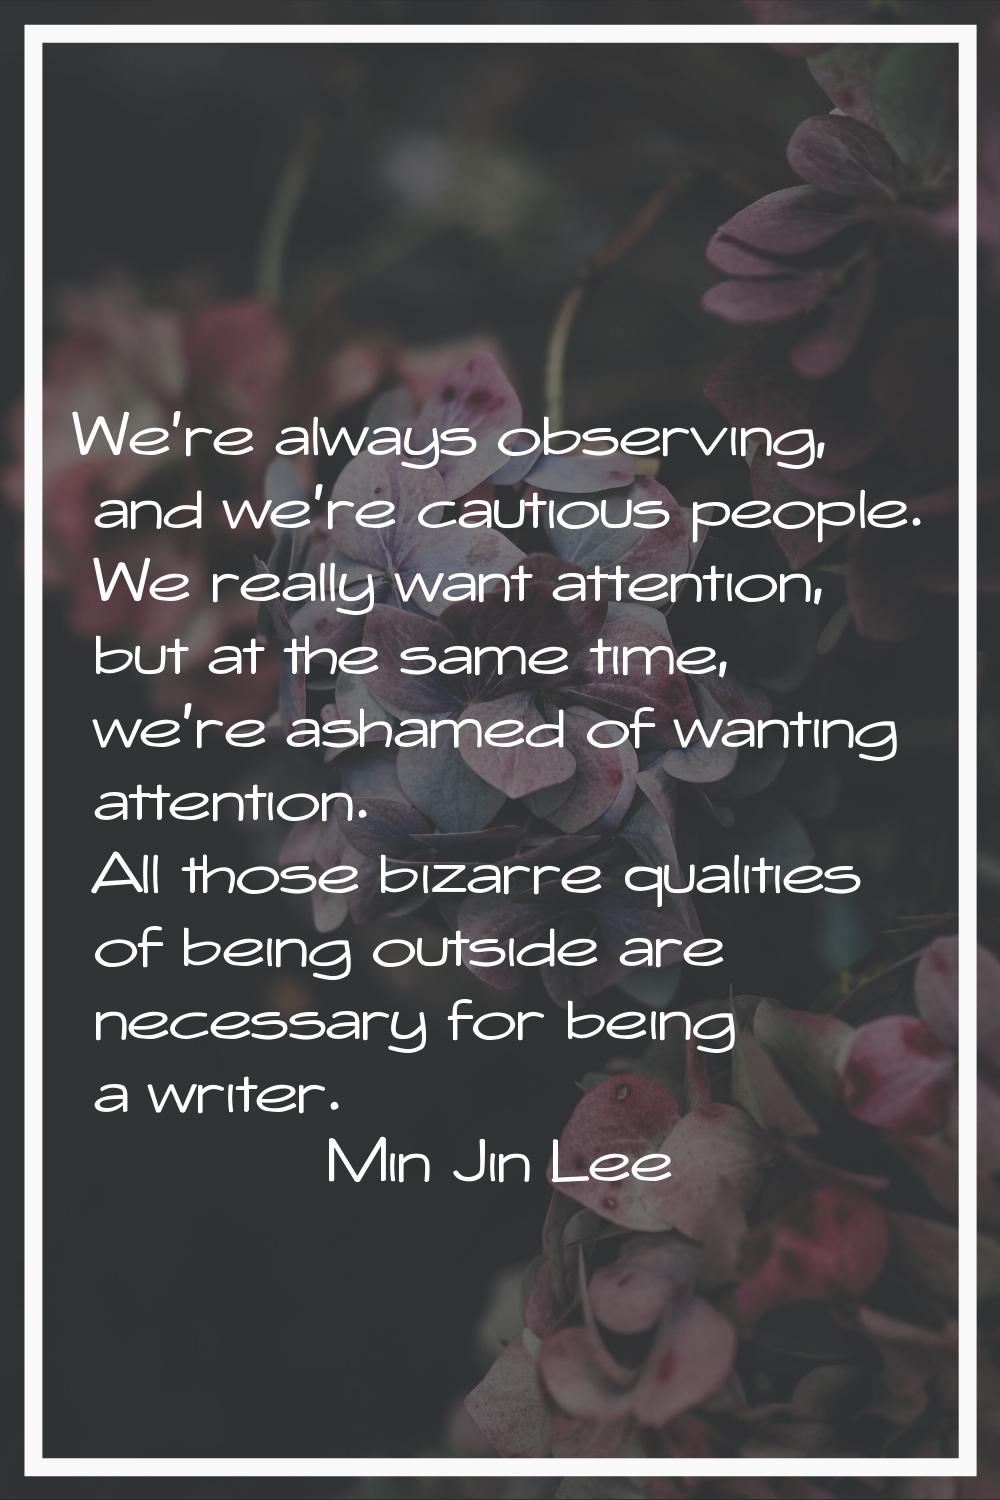 We're always observing, and we're cautious people. We really want attention, but at the same time, 